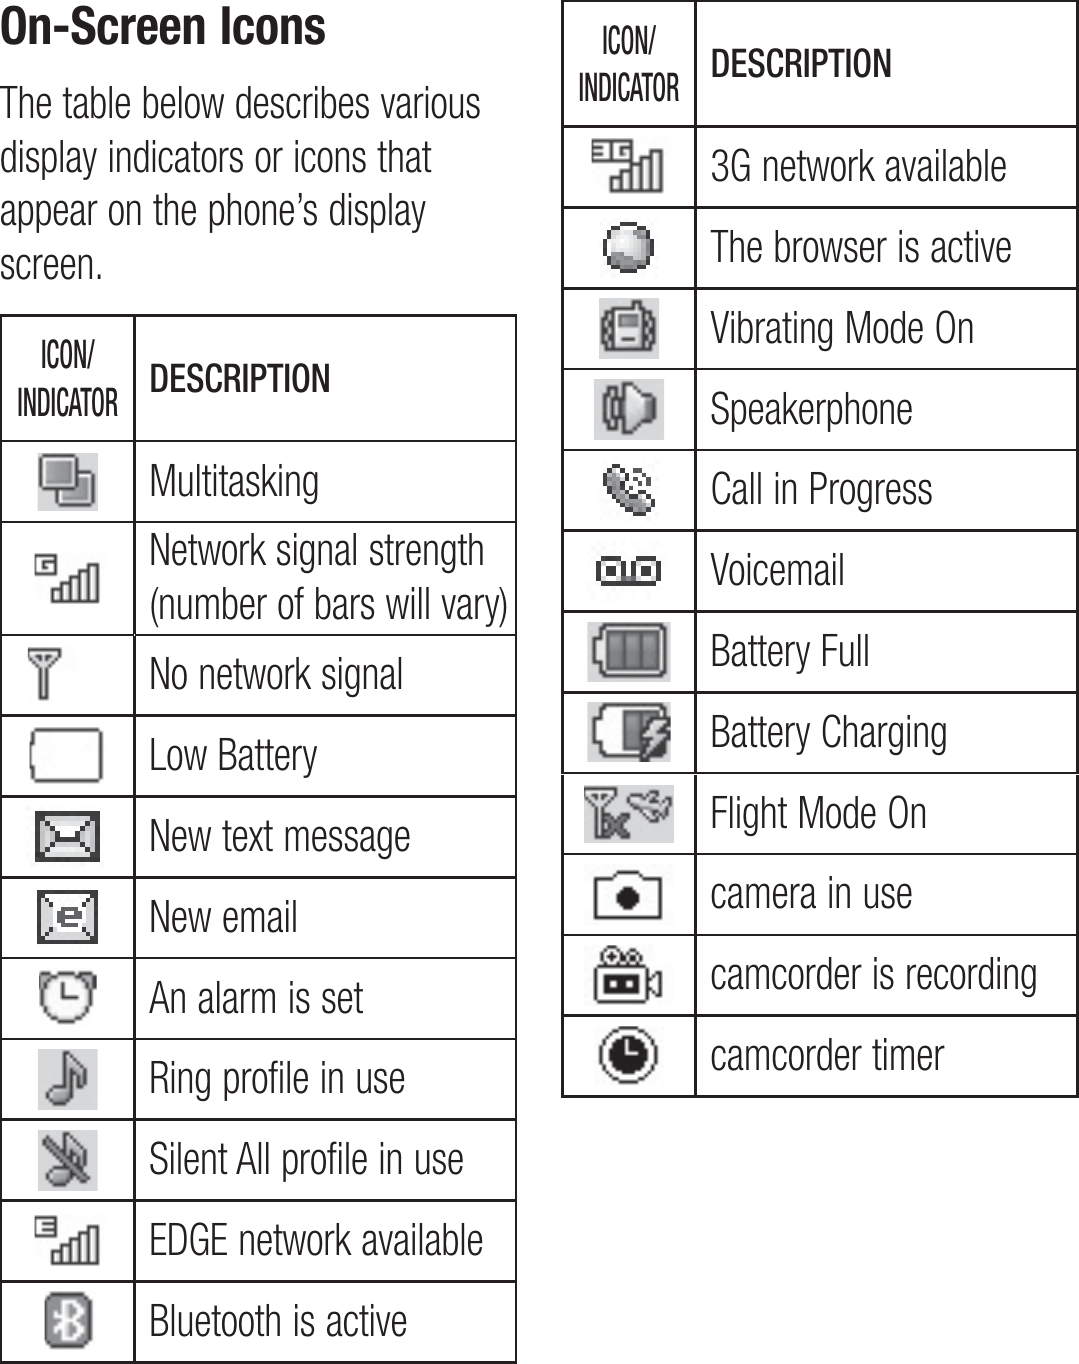 On-Screen IconsThe table below describes various display indicators or icons that appear on the phone’s display screen.ICON/ INDICATORDESCRIPTIONMultitaskingNetwork signal strength (number of bars will vary)No network signalLow BatteryNew text messageNew emailAn alarm is setRing profile in useSilent All profile in useEDGE network availableBluetooth is activeICON/ INDICATORDESCRIPTION3G network availableThe browser is activeVibrating Mode OnSpeakerphoneCall in ProgressVoicemail Battery FullBattery ChargingFlight Mode Oncamera in use camcorder is recordingcamcorder timer 